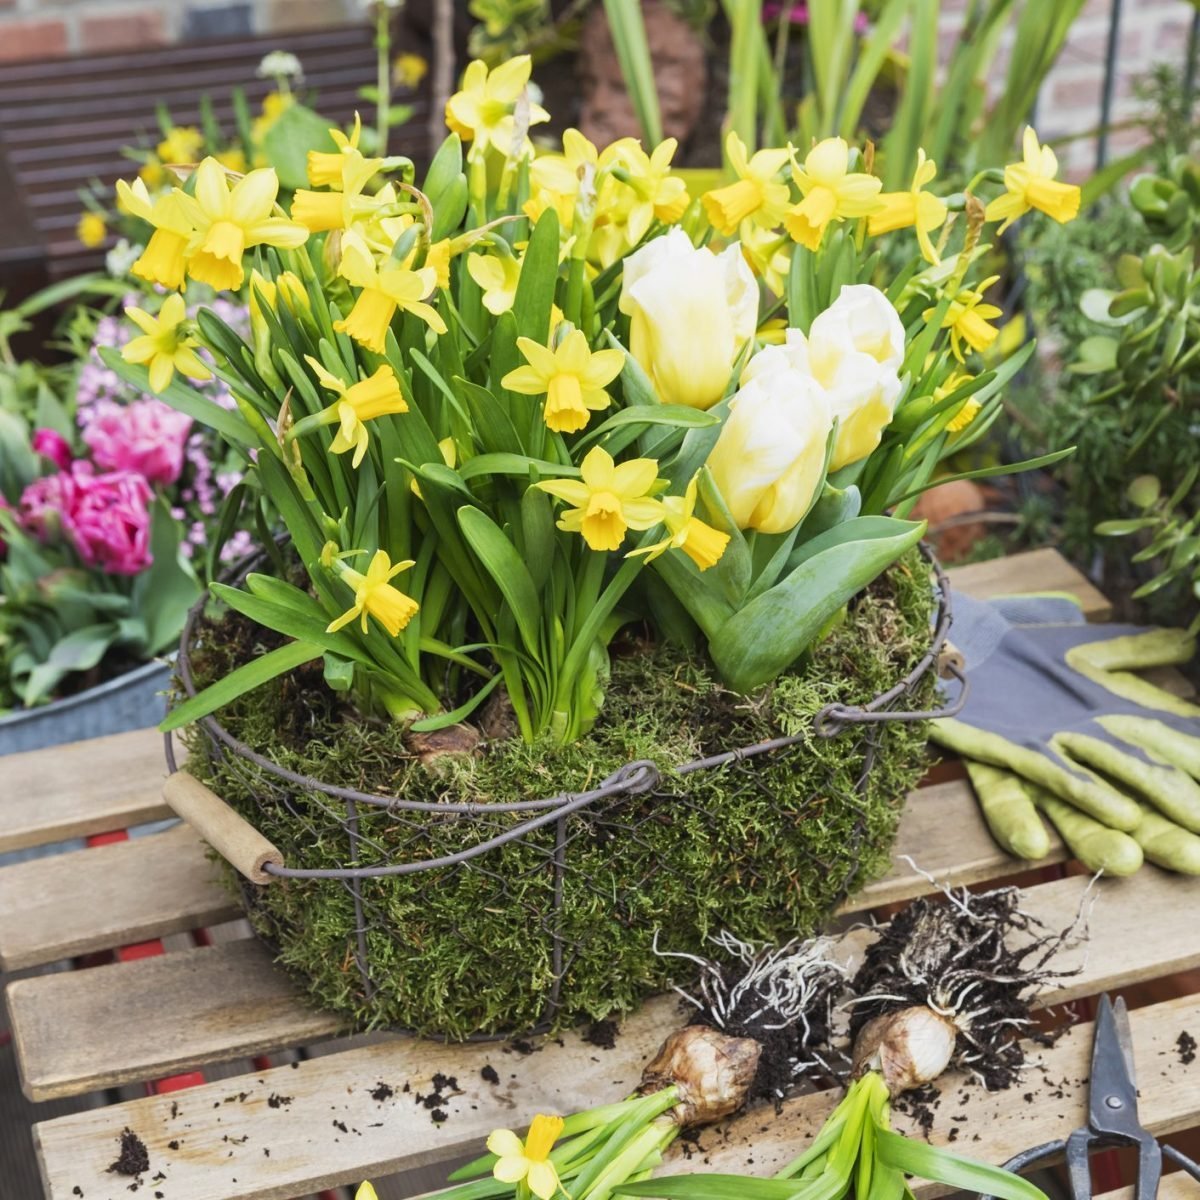 Can I Replant Potted Bulbs?